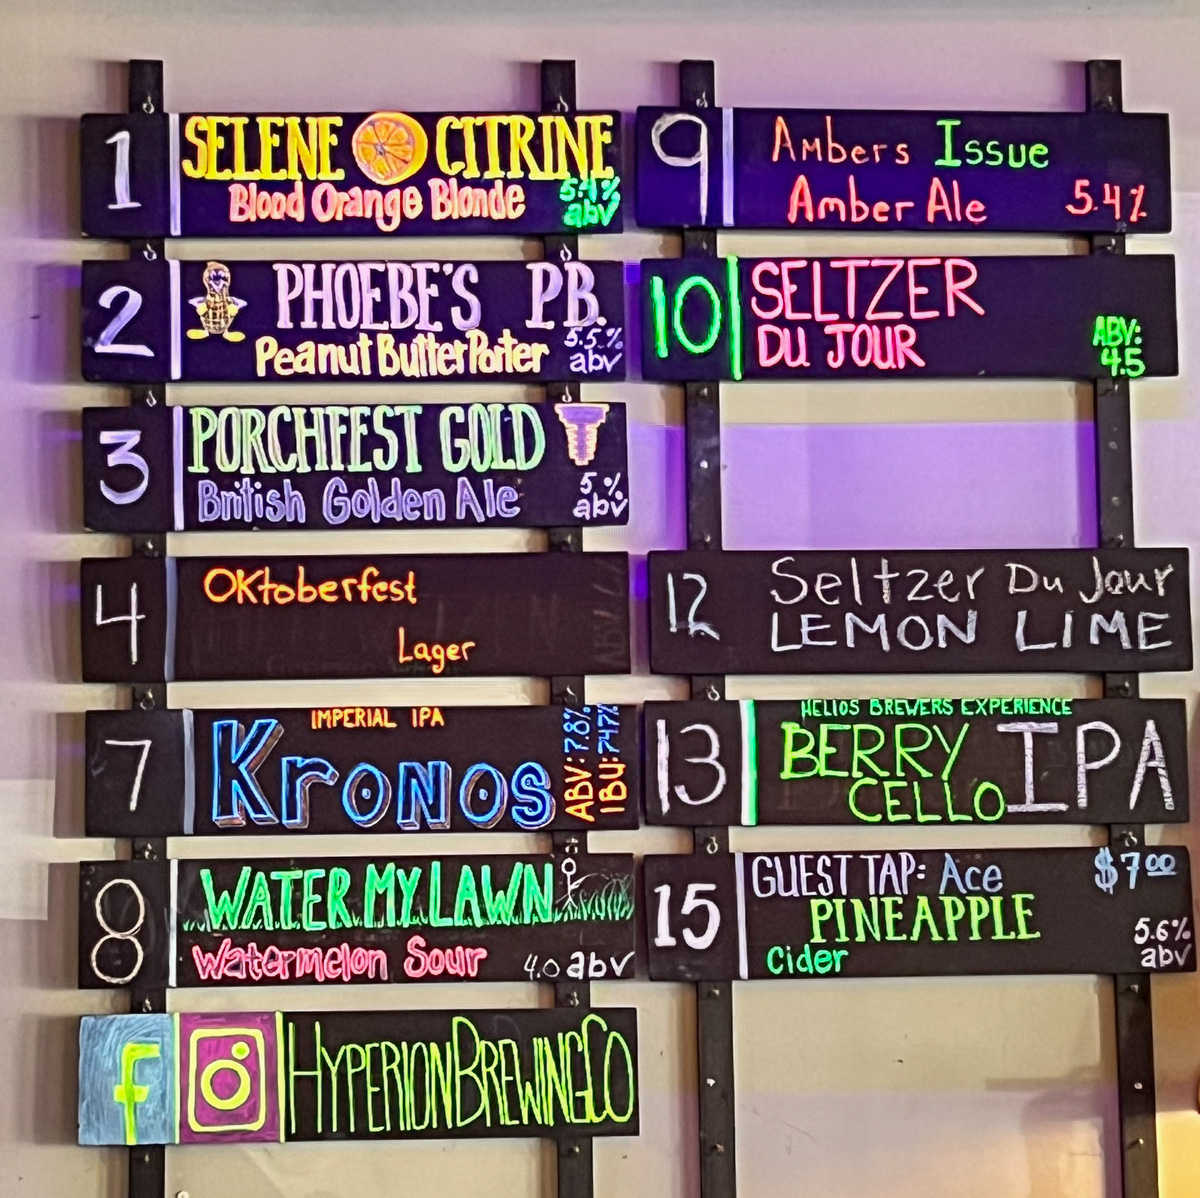 Beer on Tap - Hyperion Brewing Company | ViewFromALove